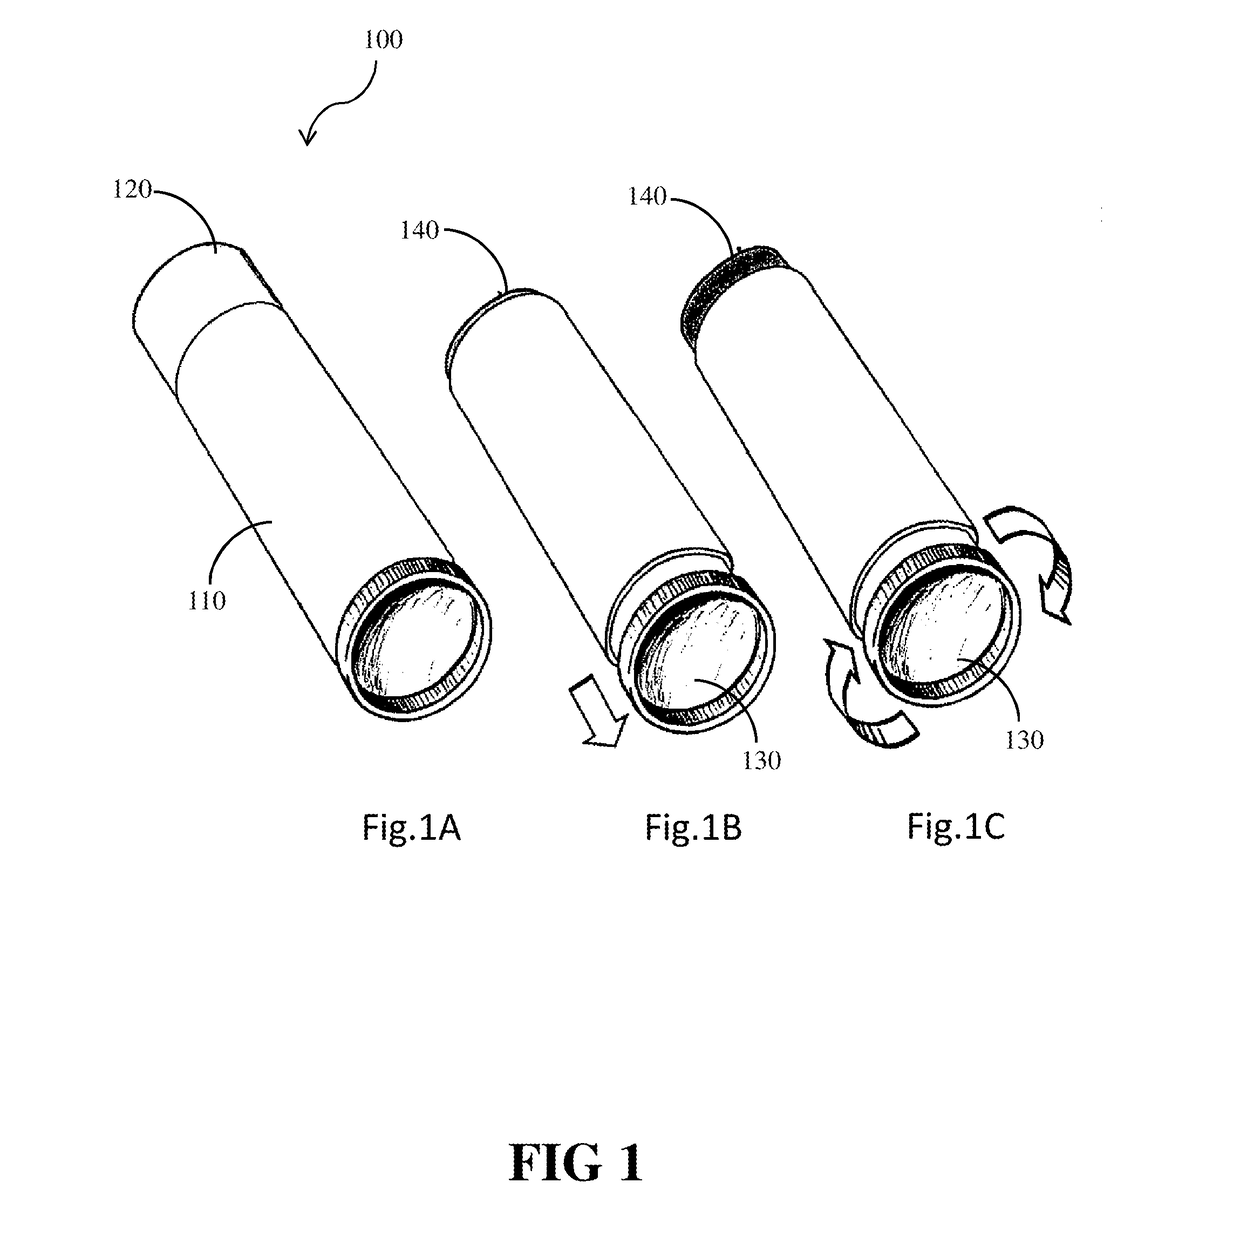 Methods for coating implant surfaces to treat surgical infections